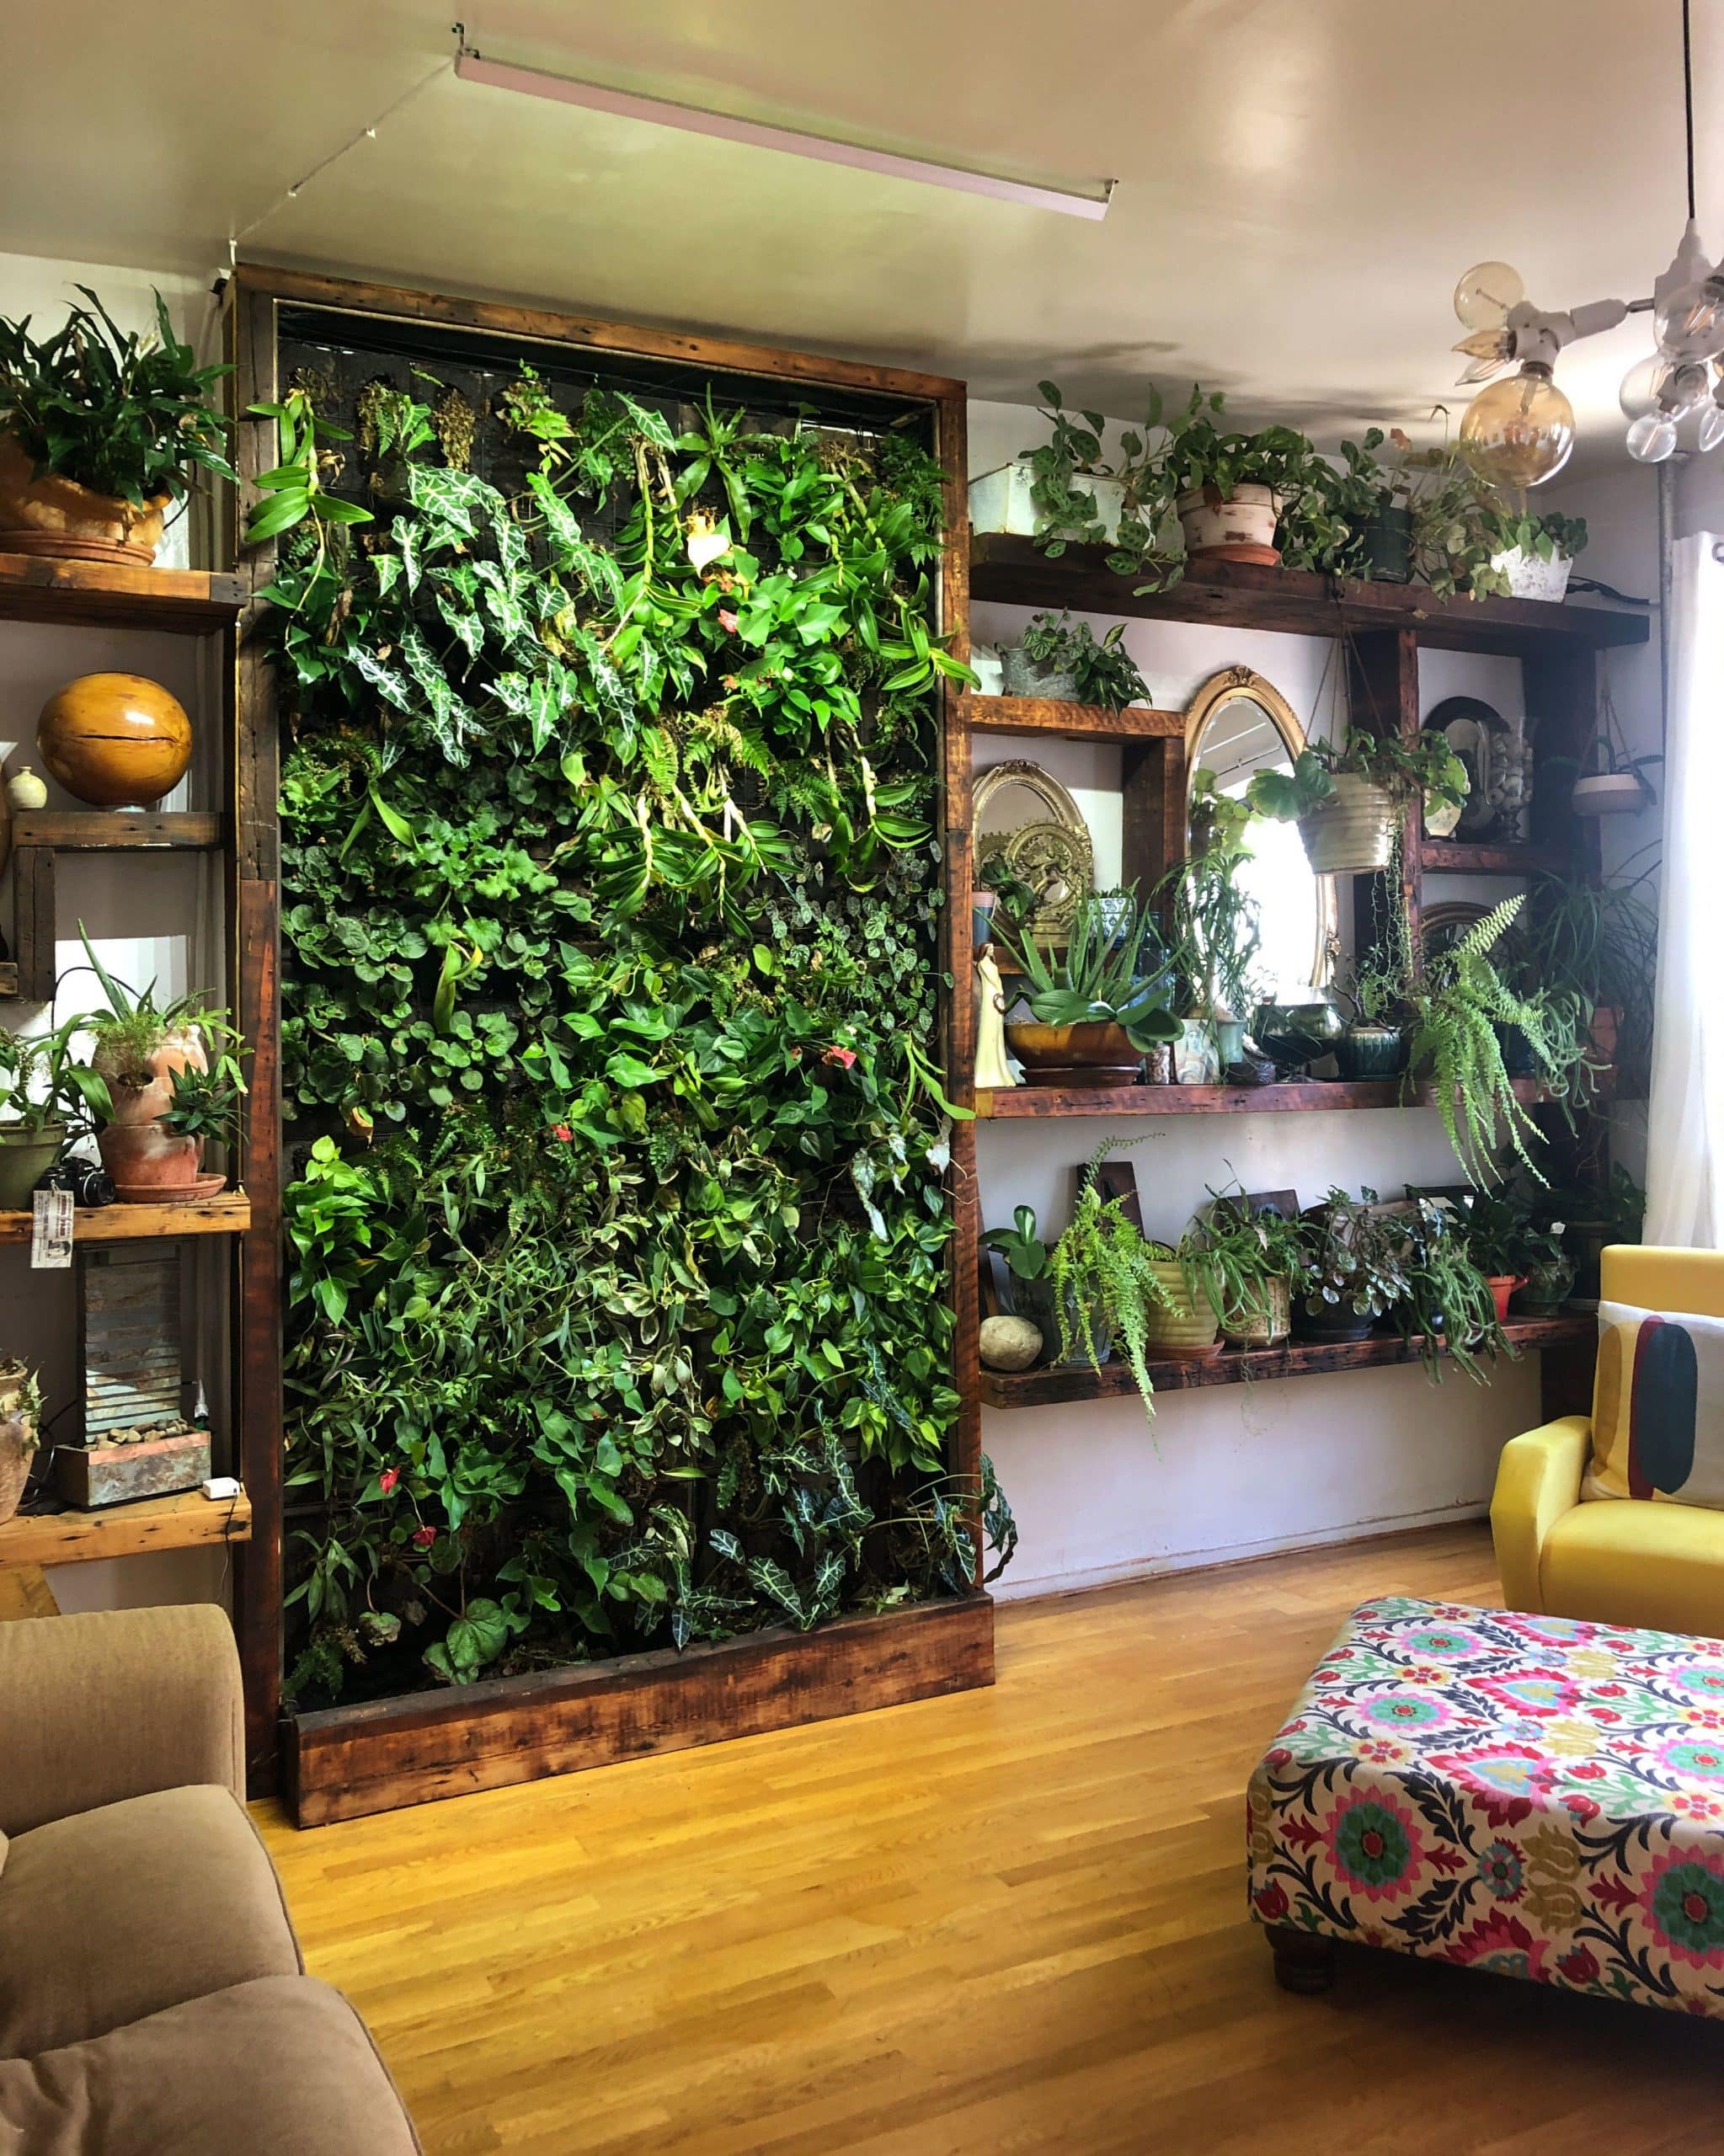 Know How Many Indoor Plants are Too Many